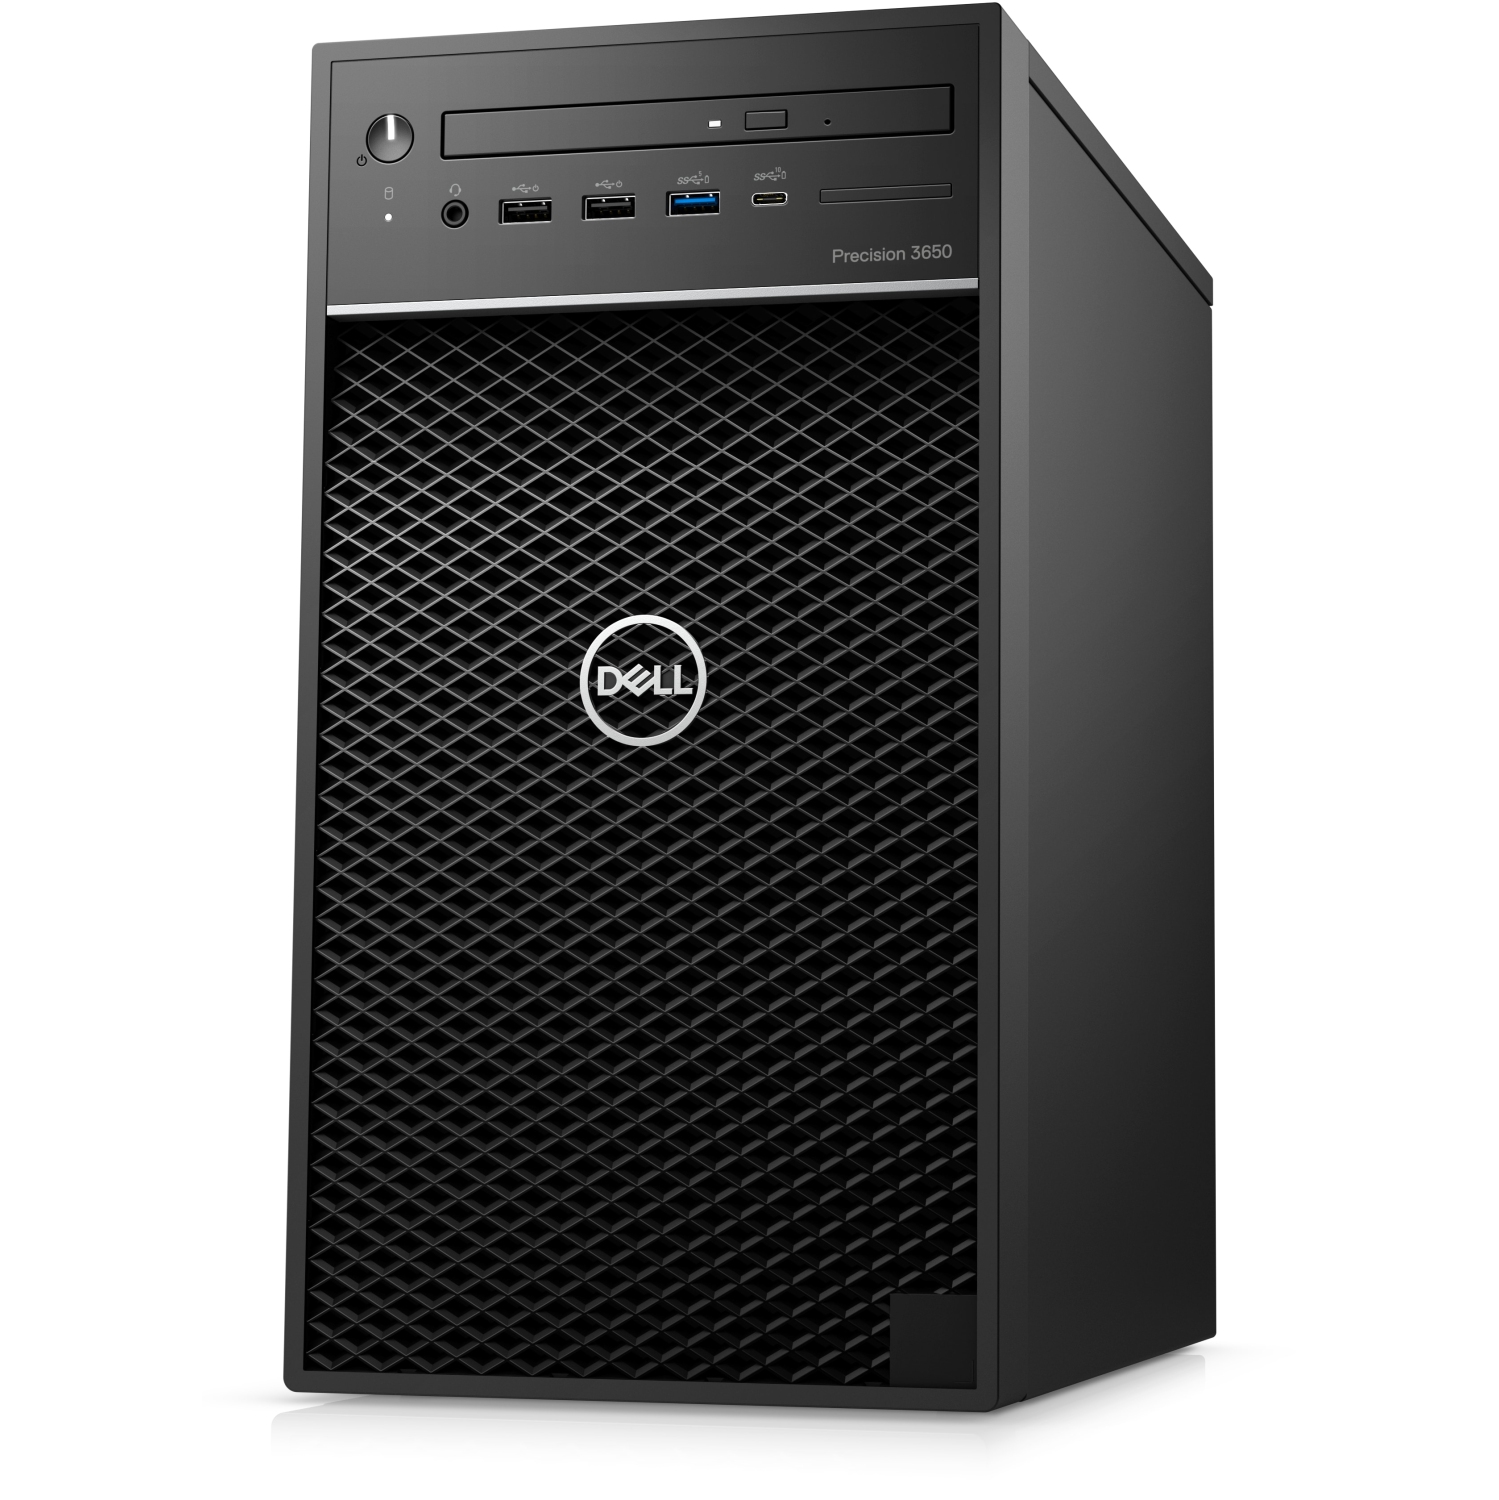 Refurbished (Excellent) - Dell Precision T3650 Workstation Desktop (2021) | Core i9 - 2TB SSD - 64GB RAM | 8 Cores @ 5.3 GHz - 11th Gen CPU Certified Refurbished